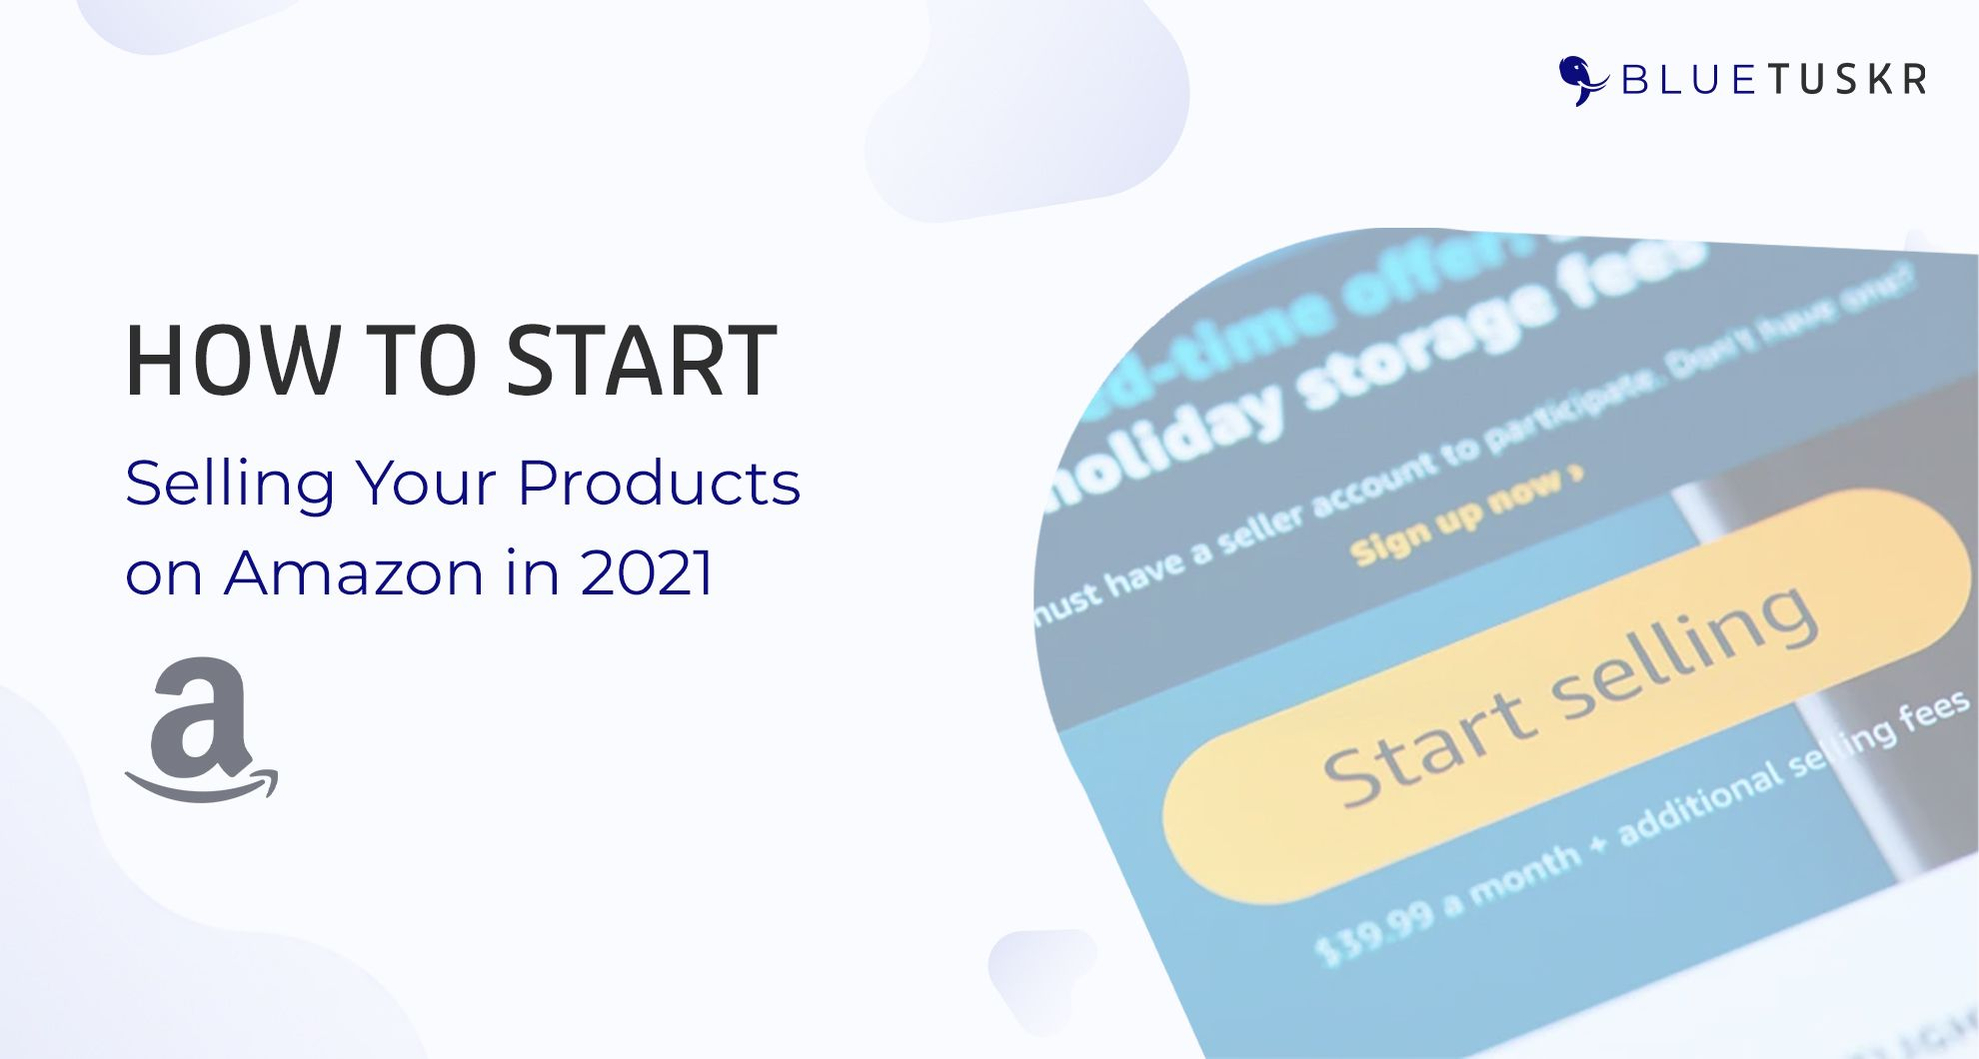 How to Start Selling Your Products on Amazon in 2021